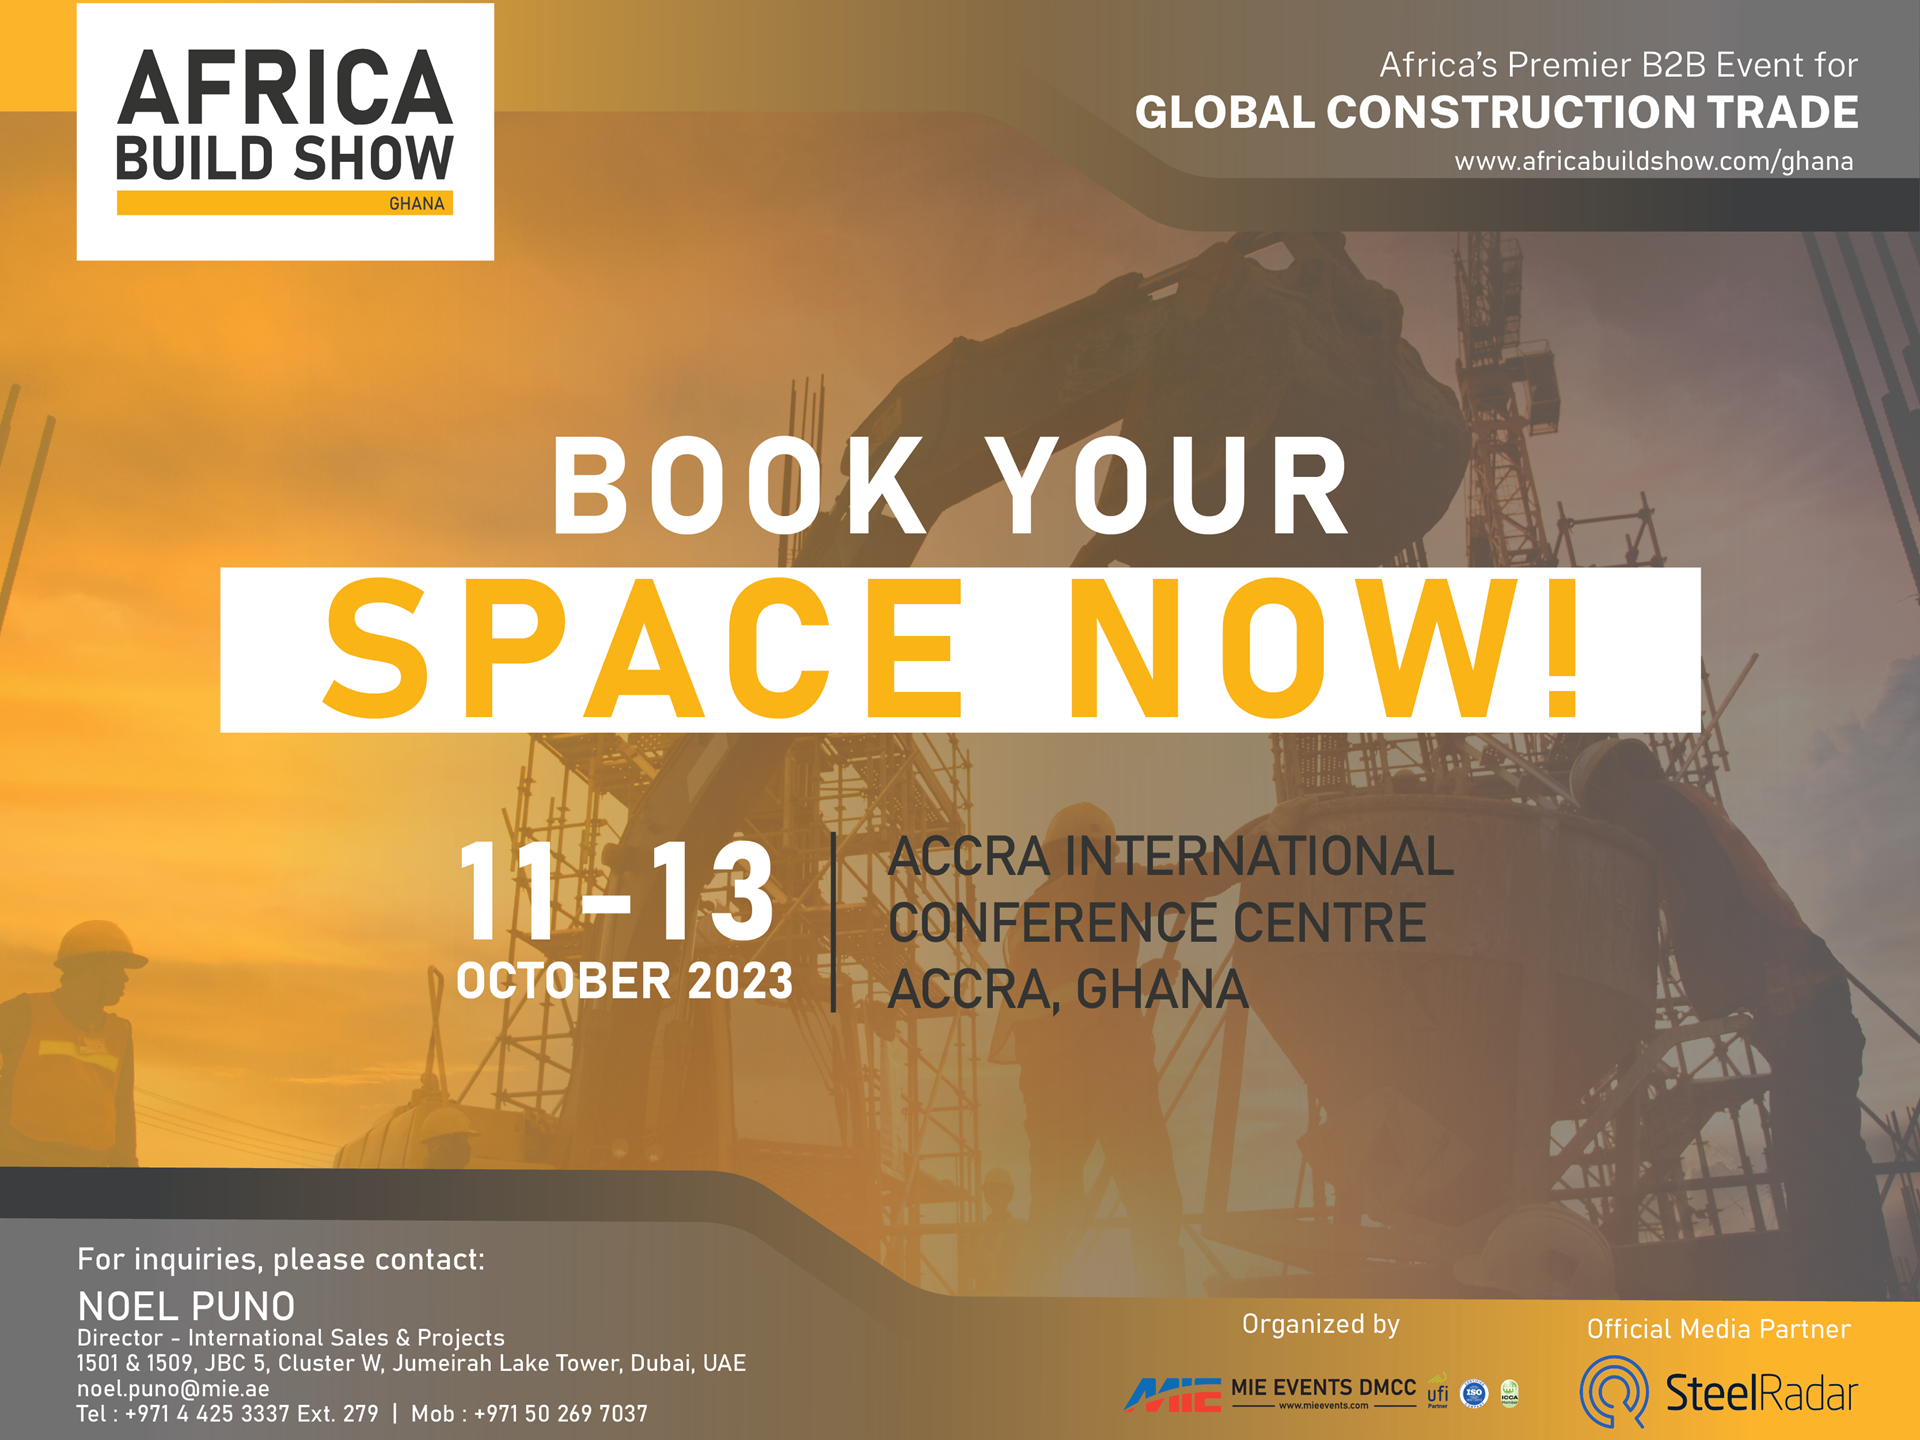 Africa Build Show Ghana offers the opportunity to explore new territories